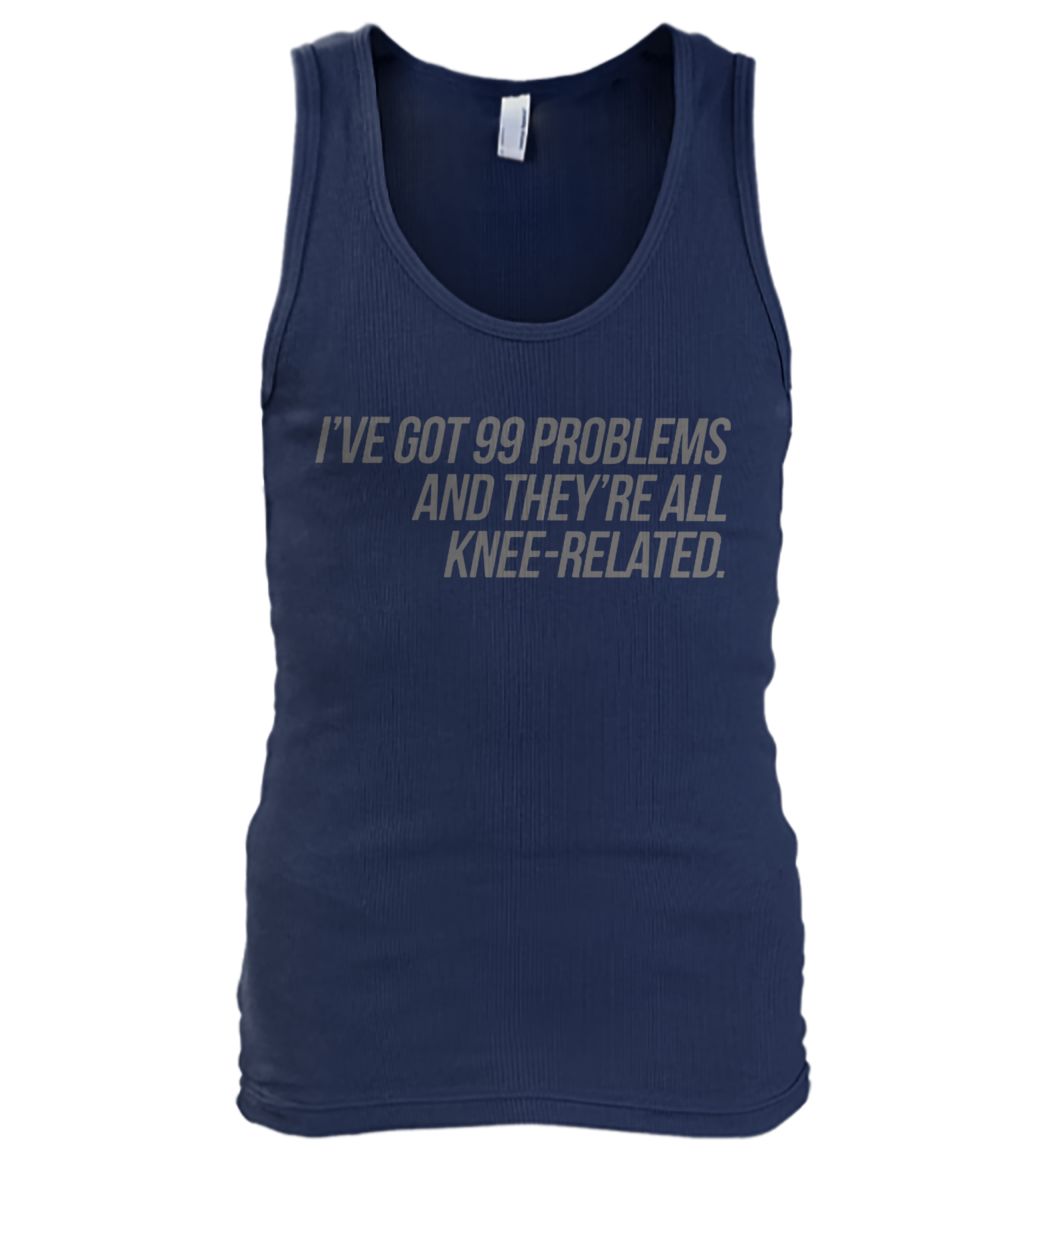 I've got 99 problems and they're all knee-related men's tank top